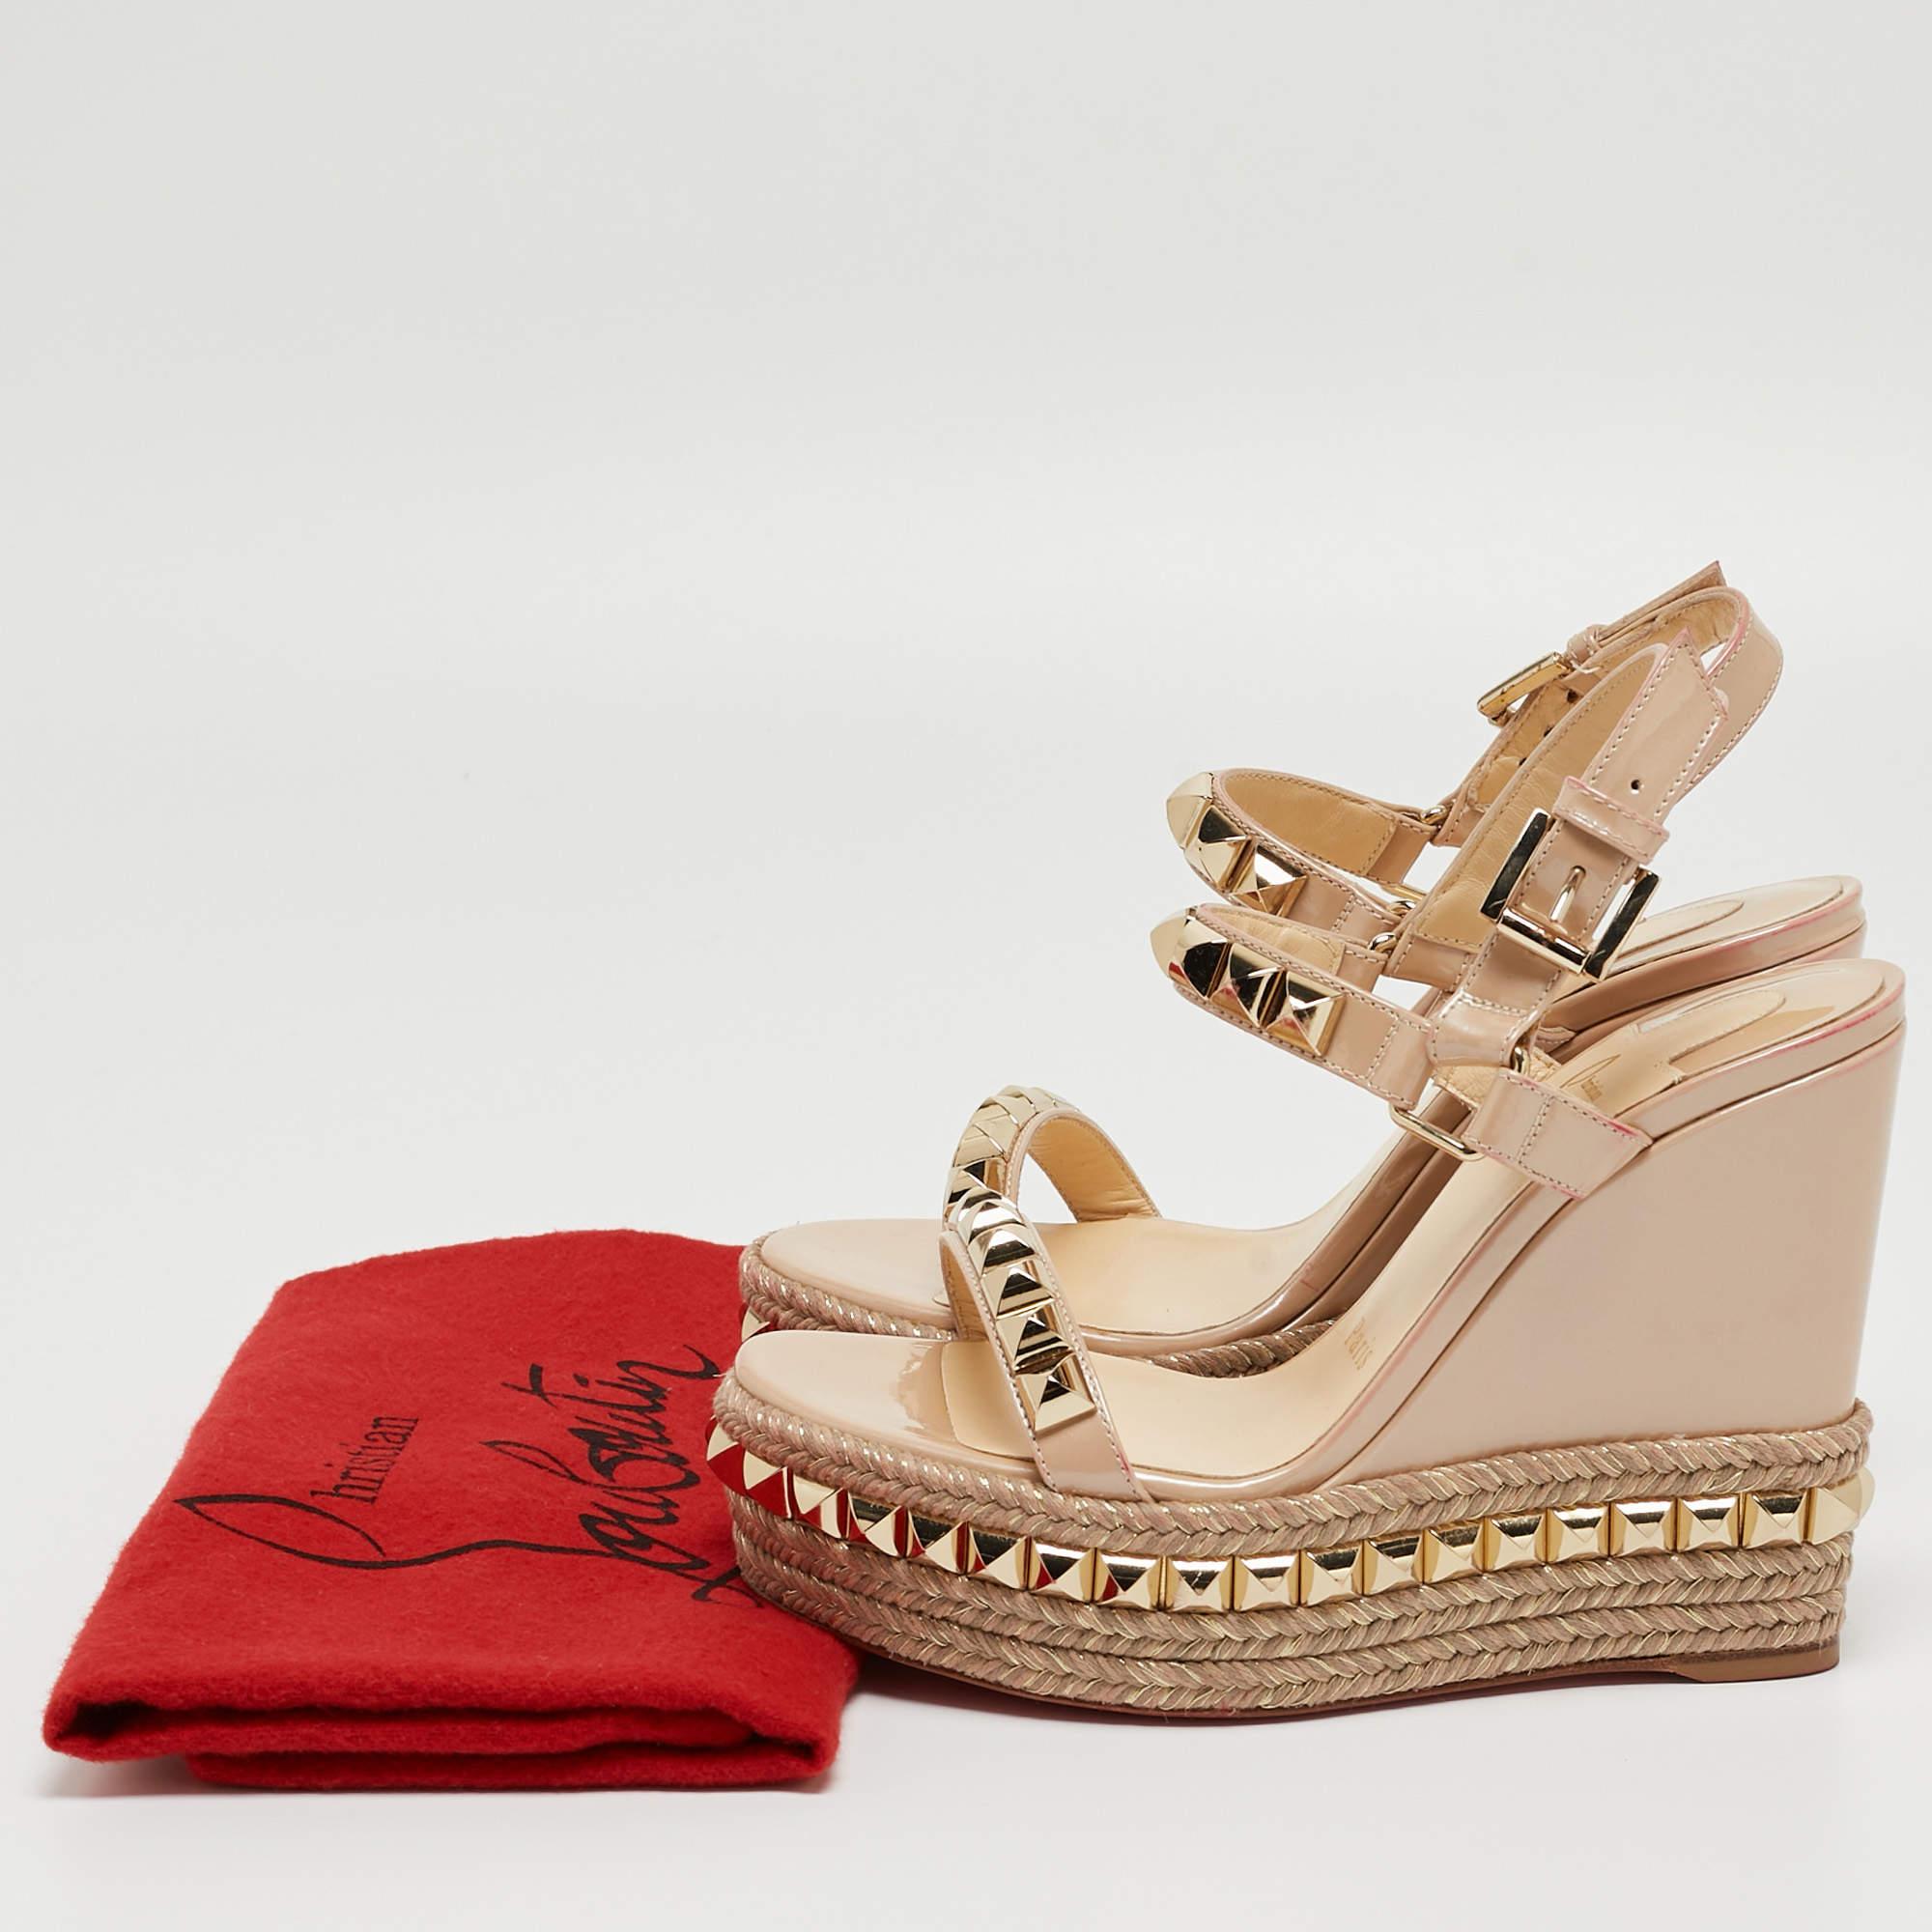 Christian Louboutin Beige Patent Leather Pyraclou Wedge Sandals Size 35 In Excellent Condition For Sale In Dubai, Al Qouz 2